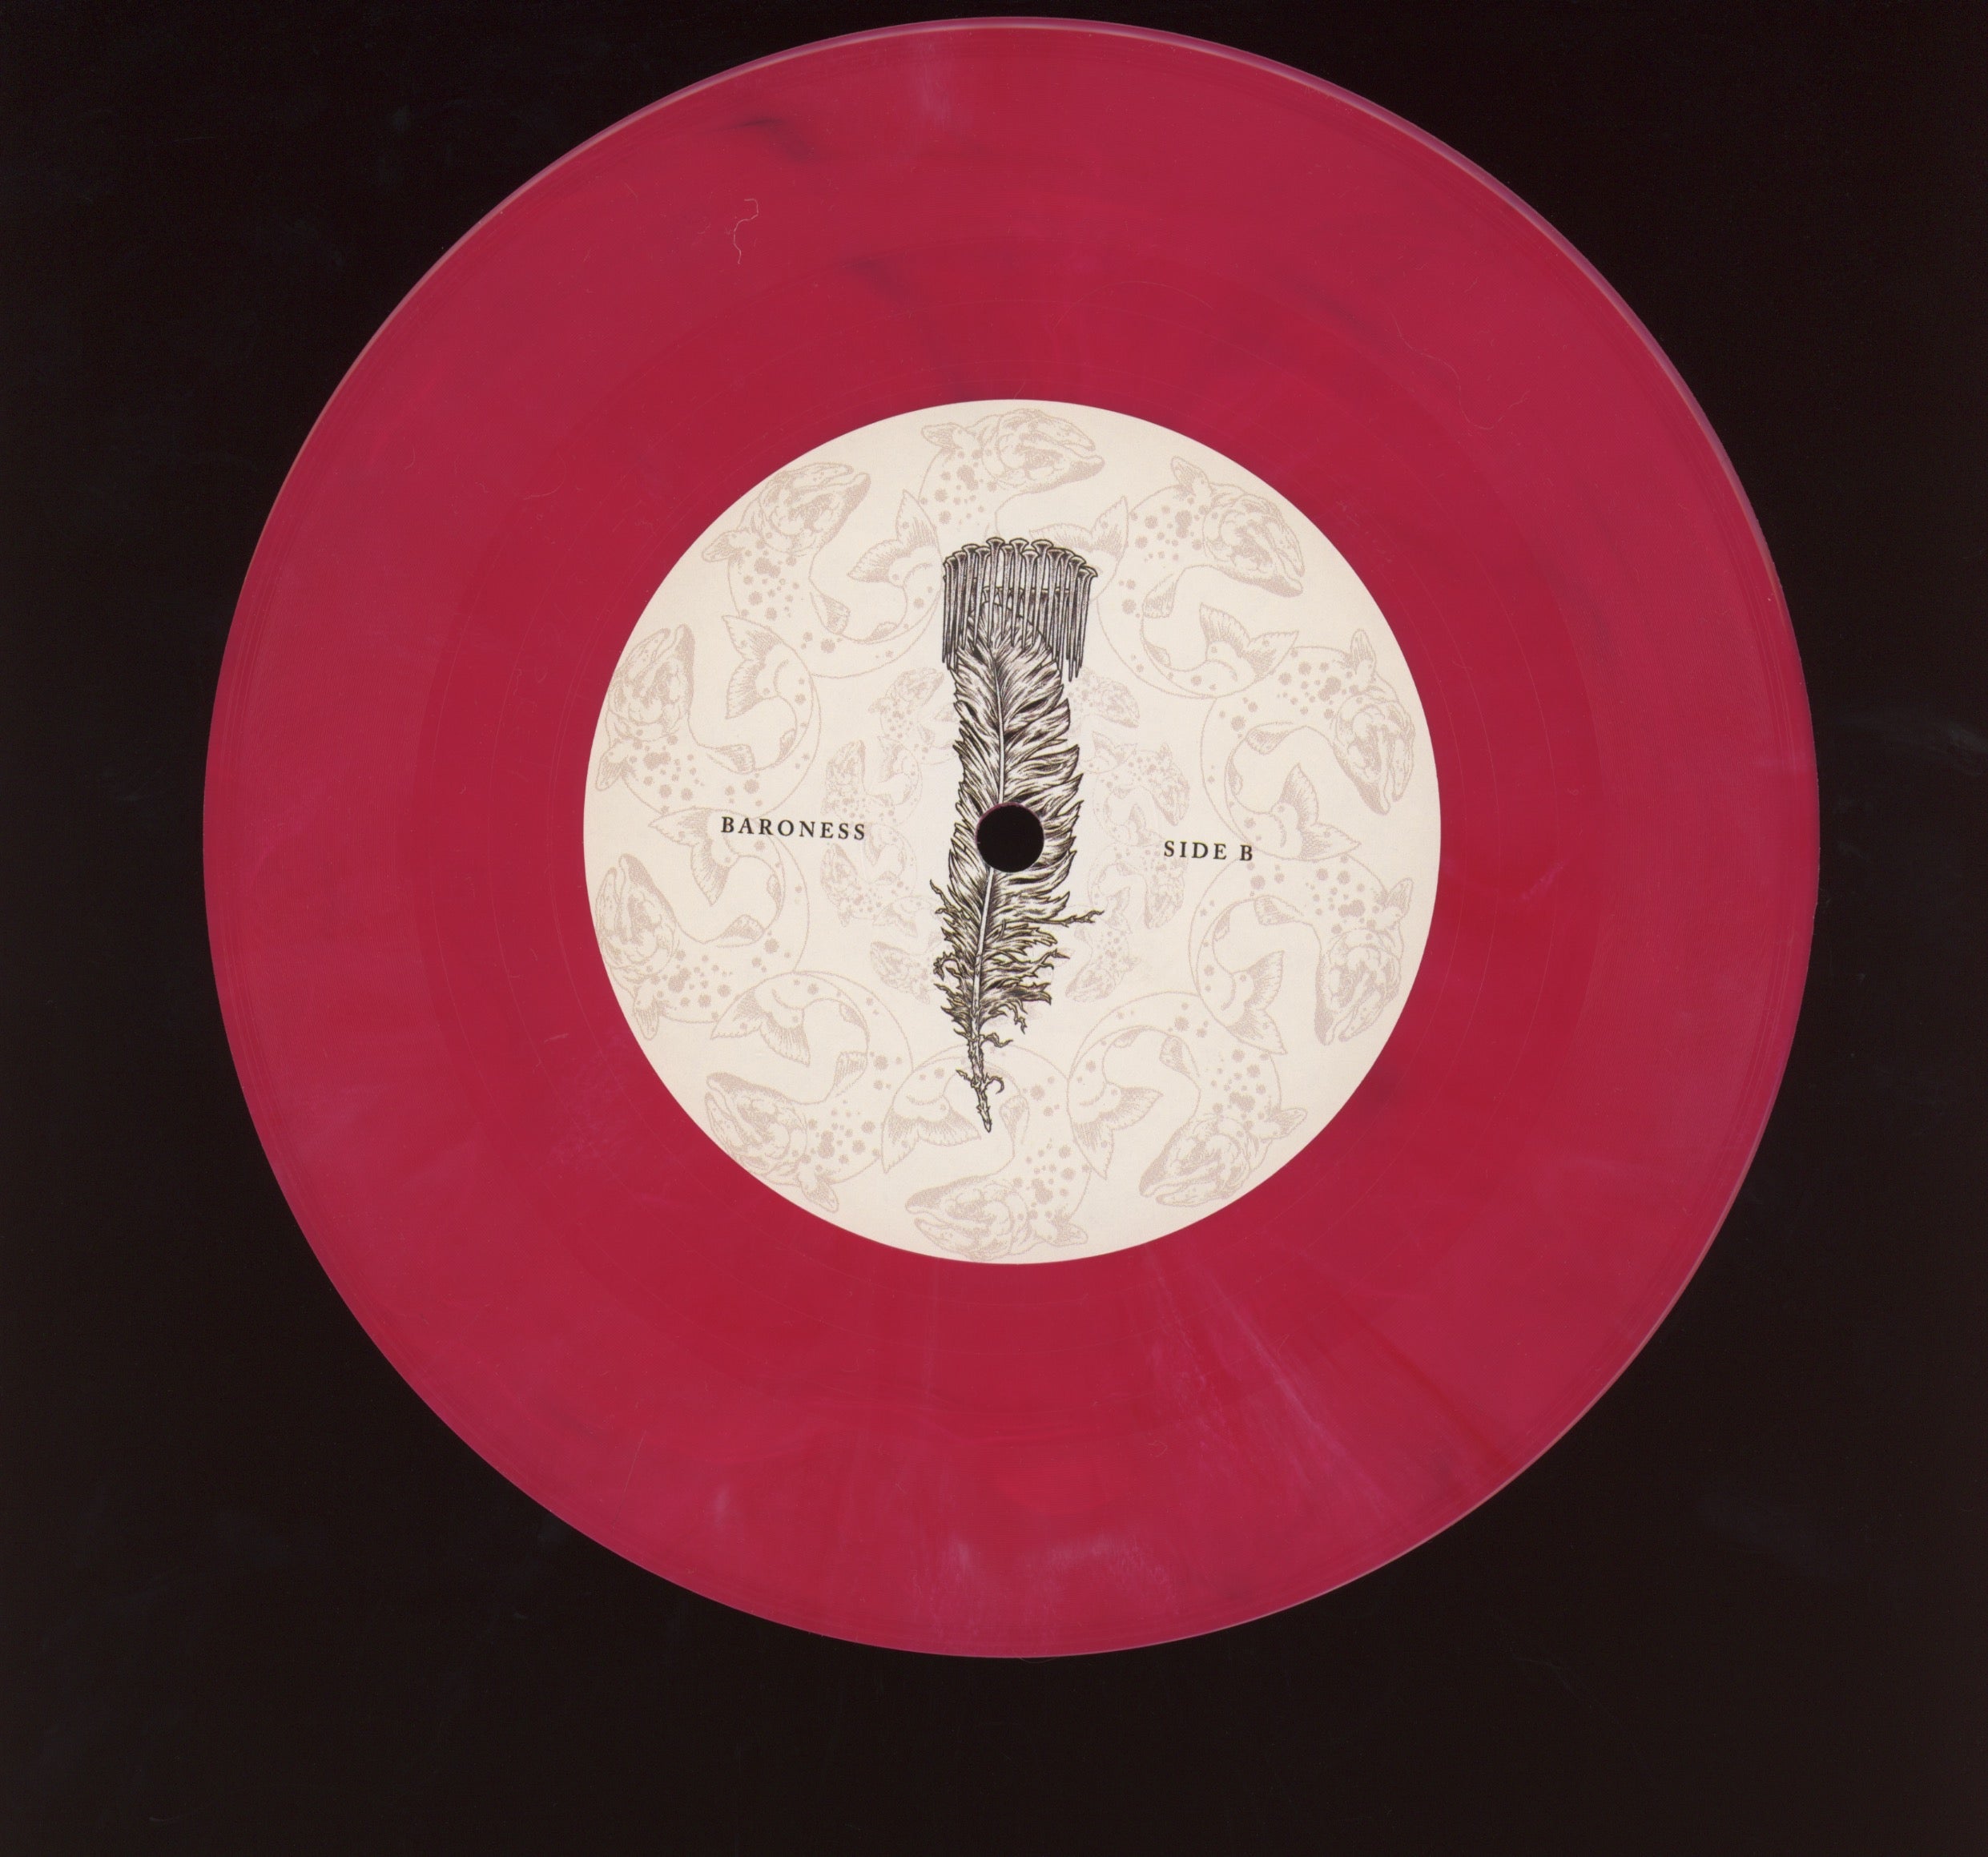 Baroness - A Horse Called Golgotha on Relapse Limited Red Vinyl 7"